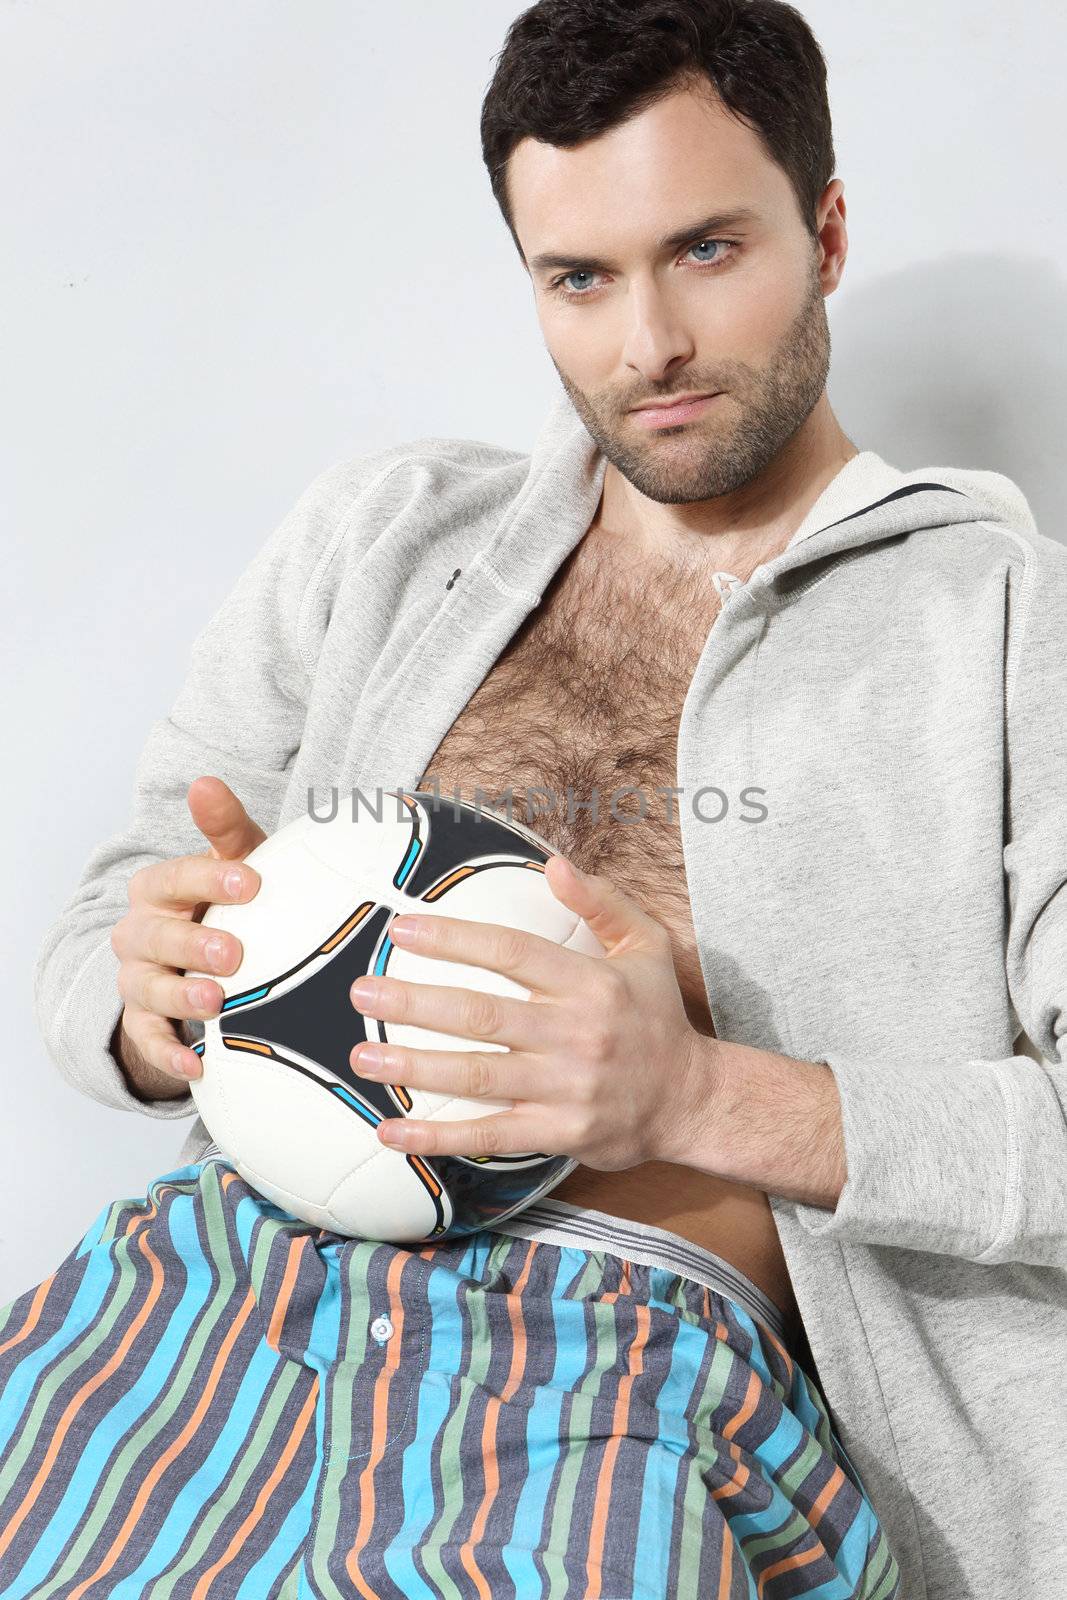 Man with a soccer ball on a gray background